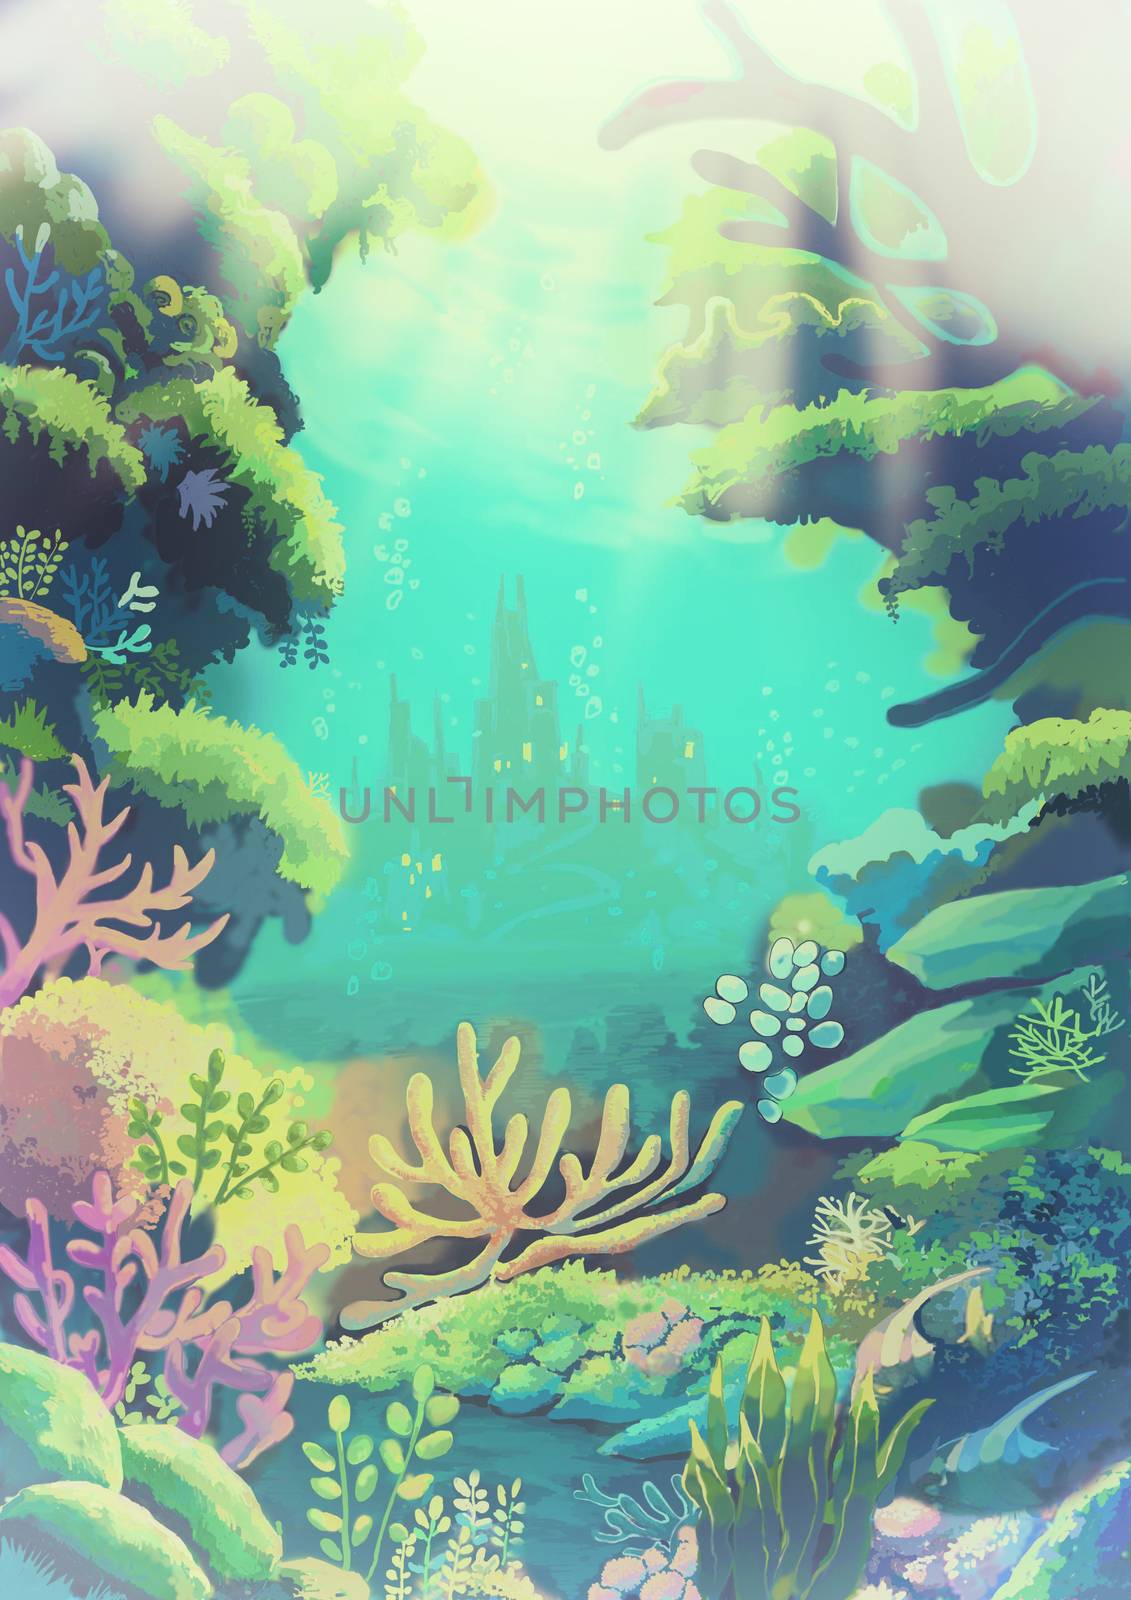 Illustration: The Sea where the Little Mermaids' Father live. Vintage Version. Realistic Style. Scene / Wallpaper / Background Design.